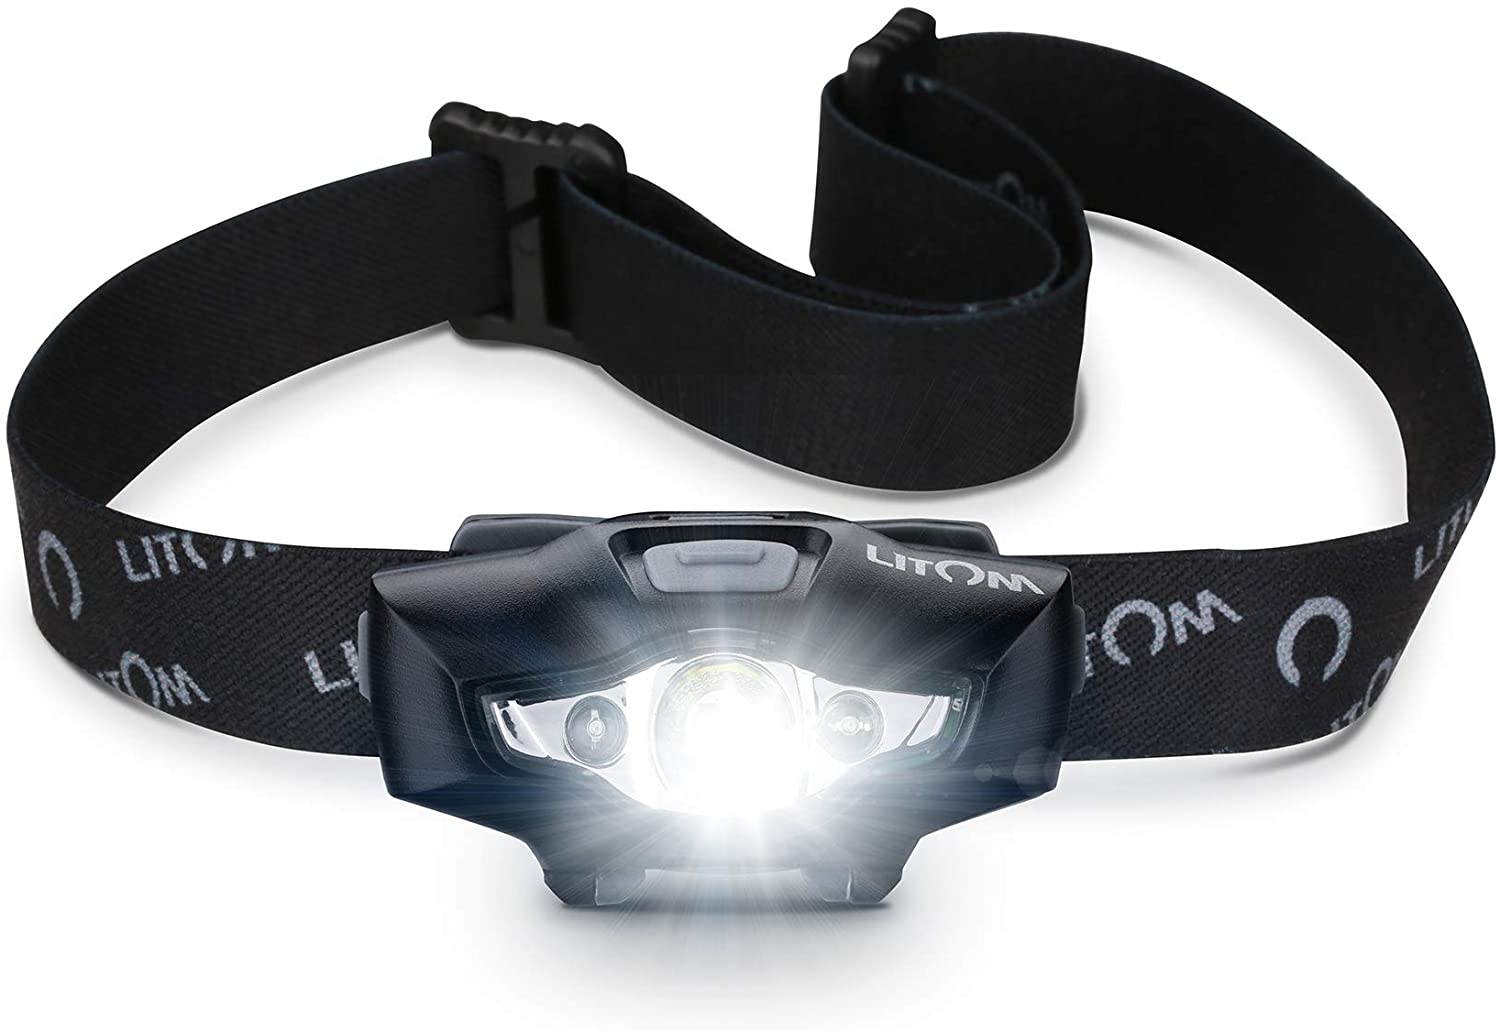 Super Bright Headlamp Waterproof Flashlight with 6 Lighting Mode Perfect for Camping, Hiking, Reading - e4cents